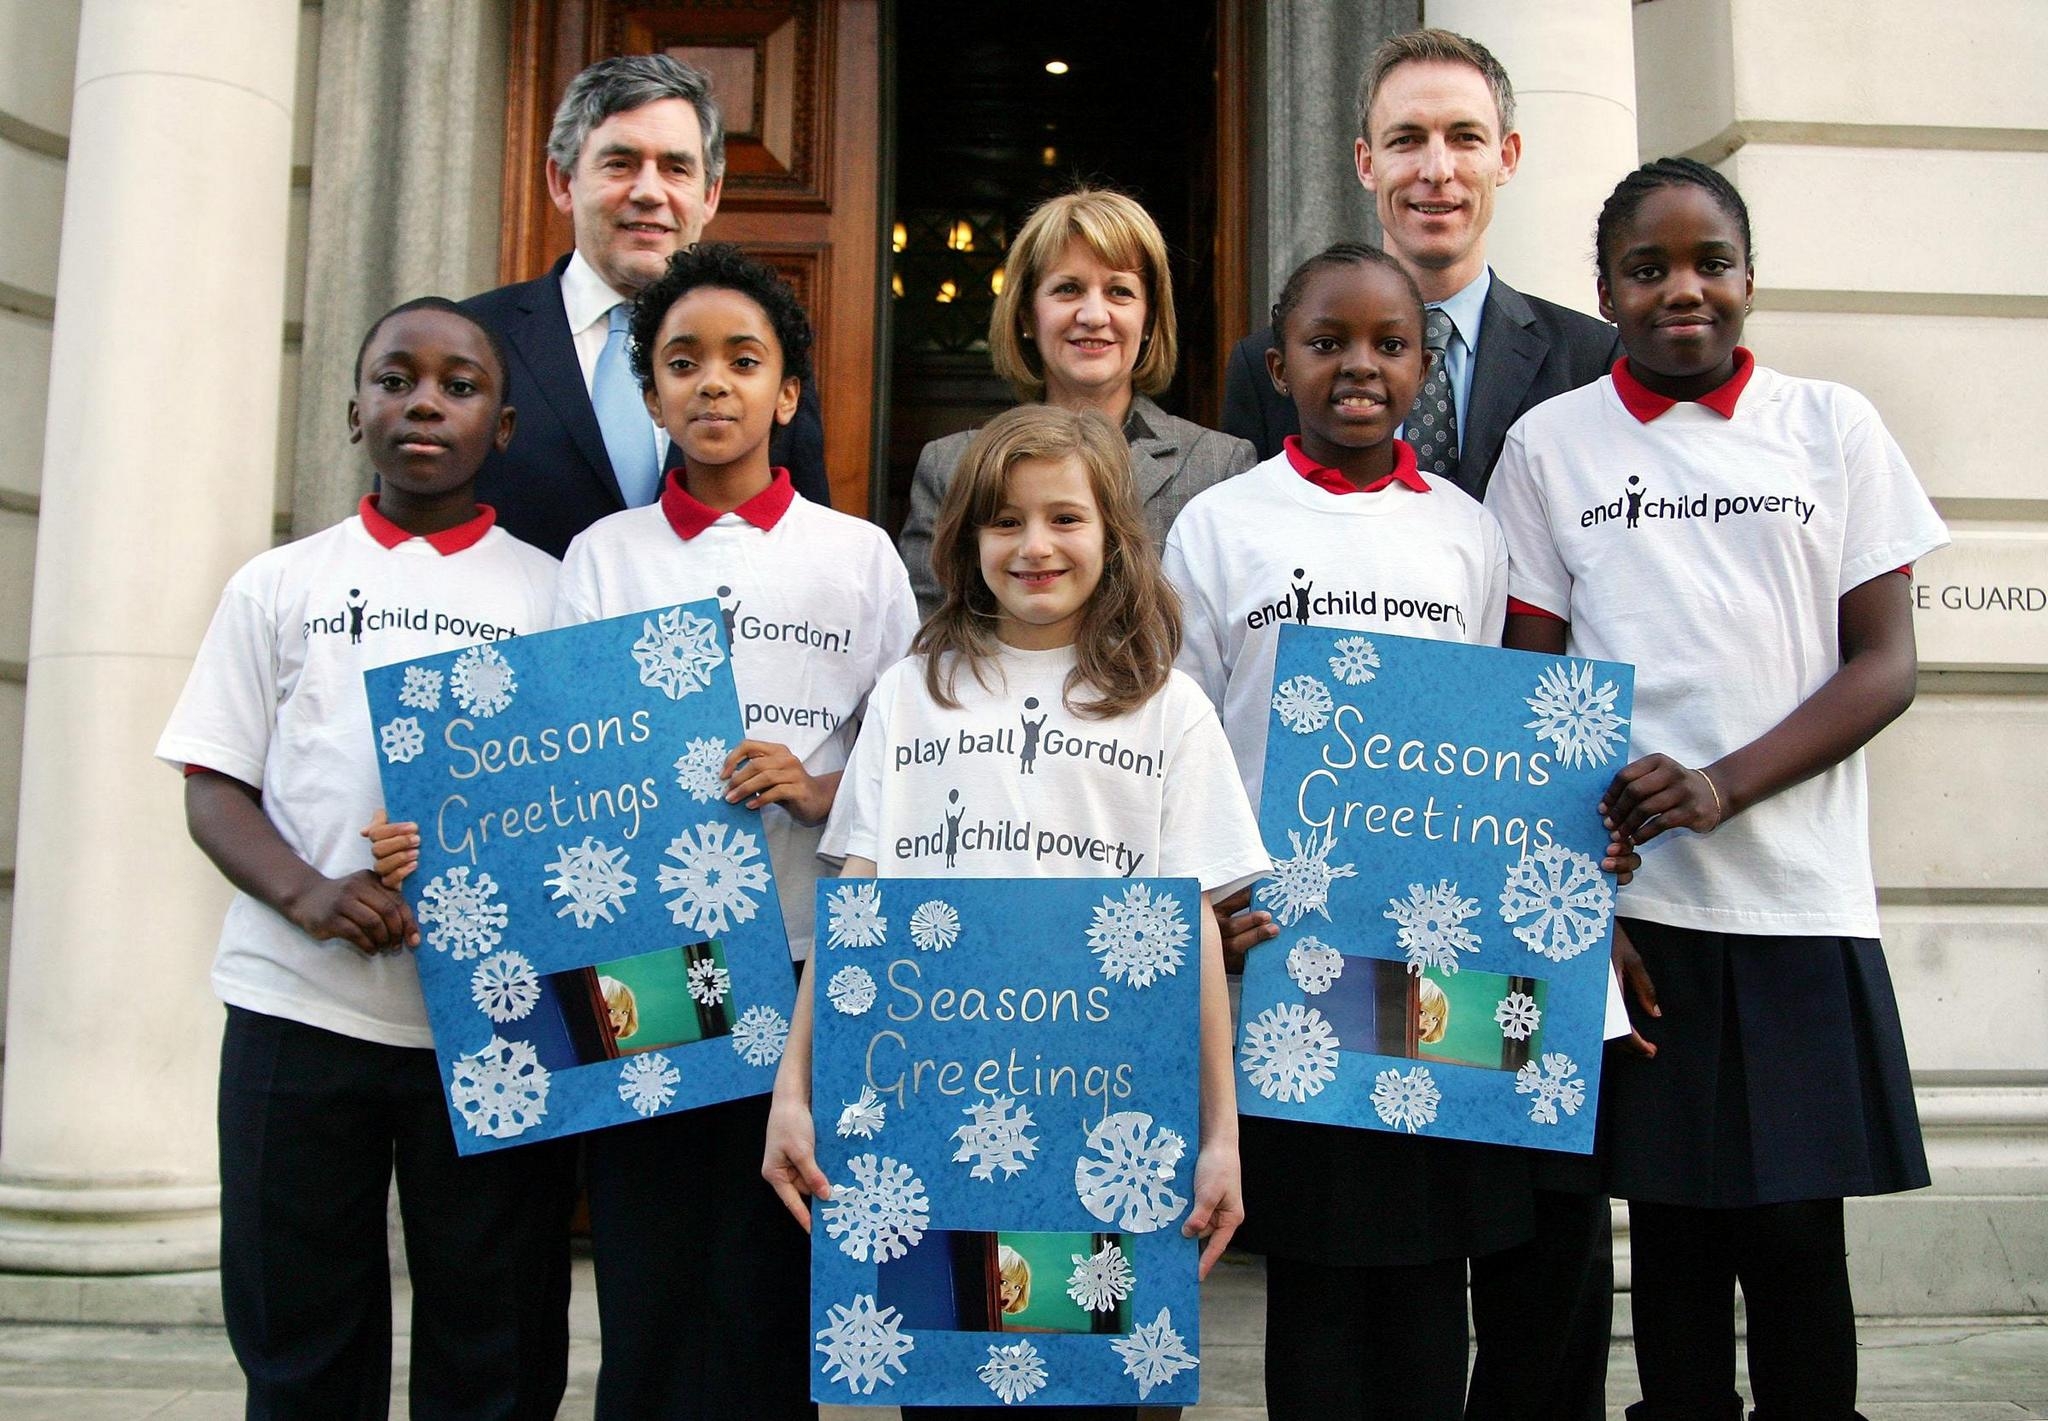 Bev and Gordon Brown with children as part of the Campaign to End Child Poverty